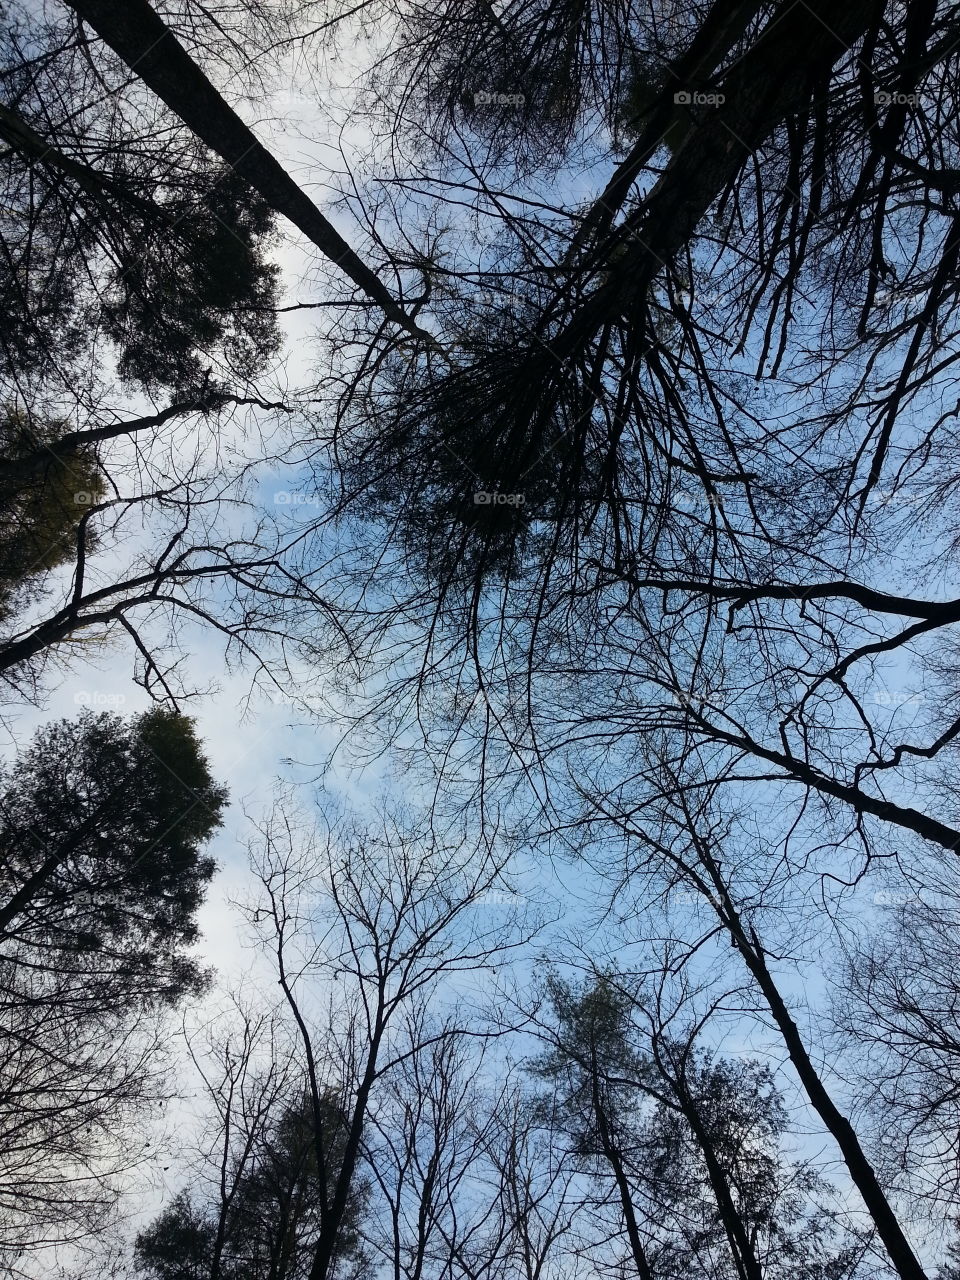 Forest Sky